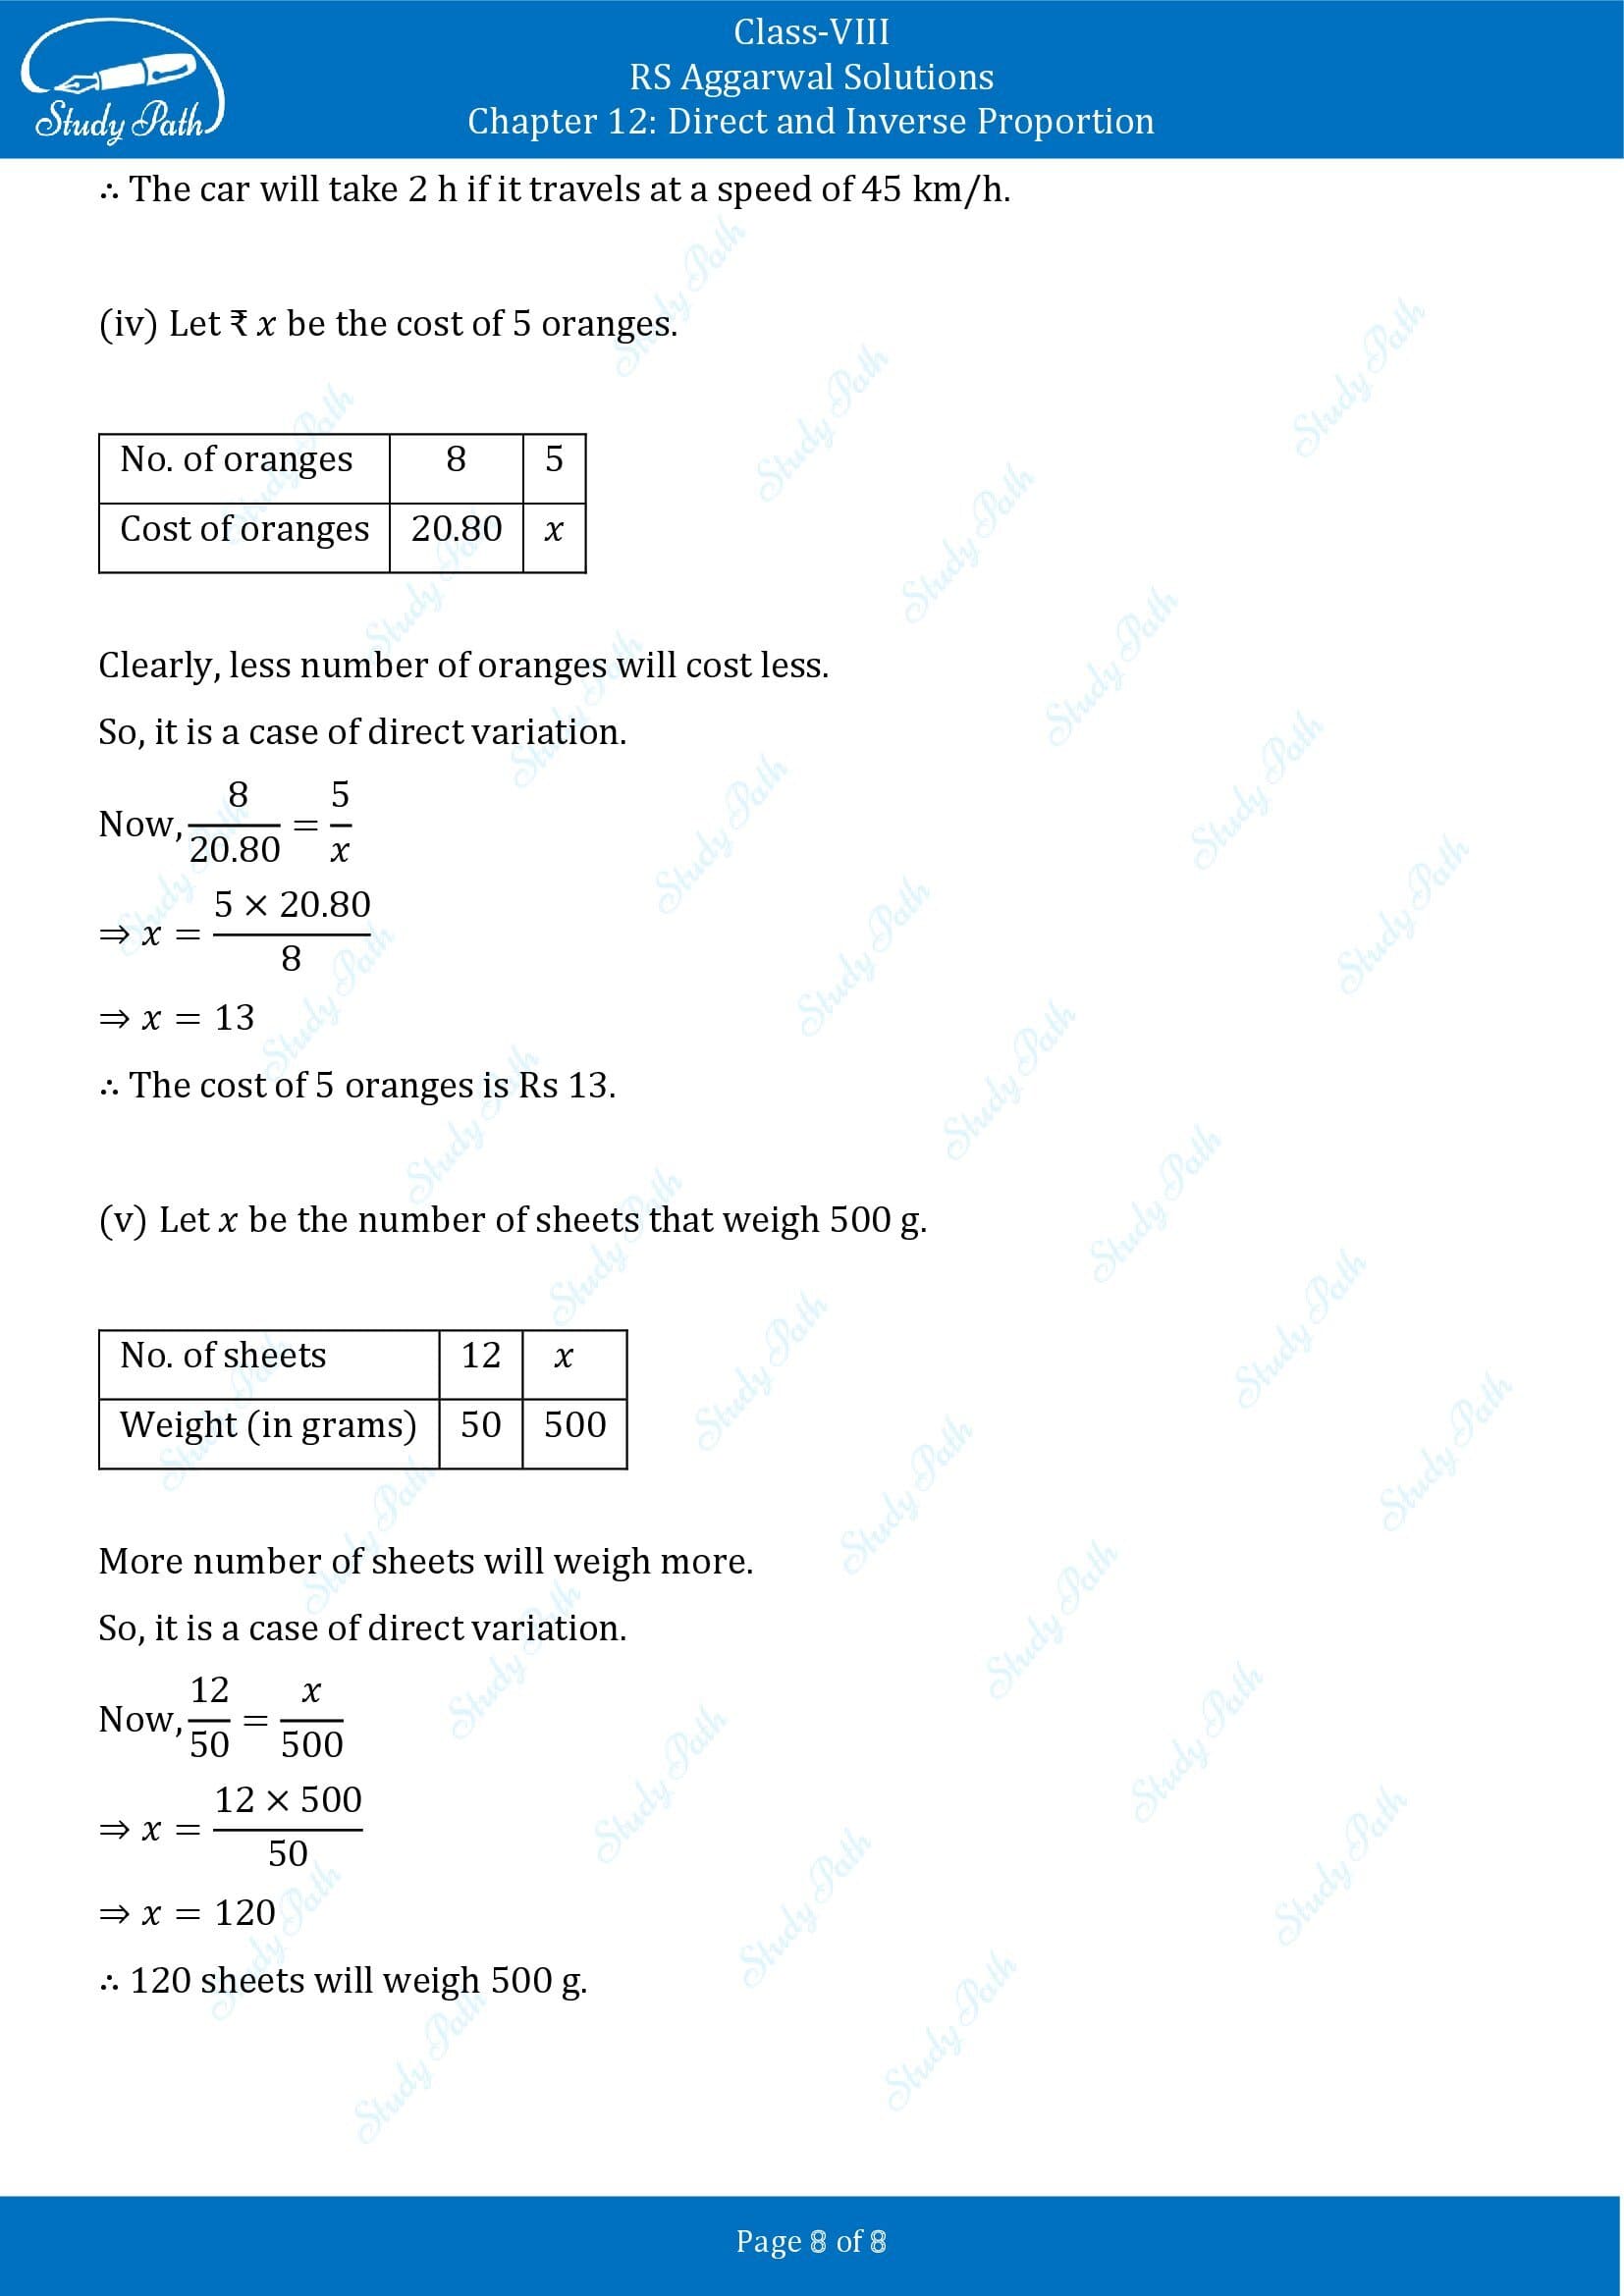 RS Aggarwal Solutions Class 8 Chapter 12 Direct and Inverse Proportion Test Paper 00008